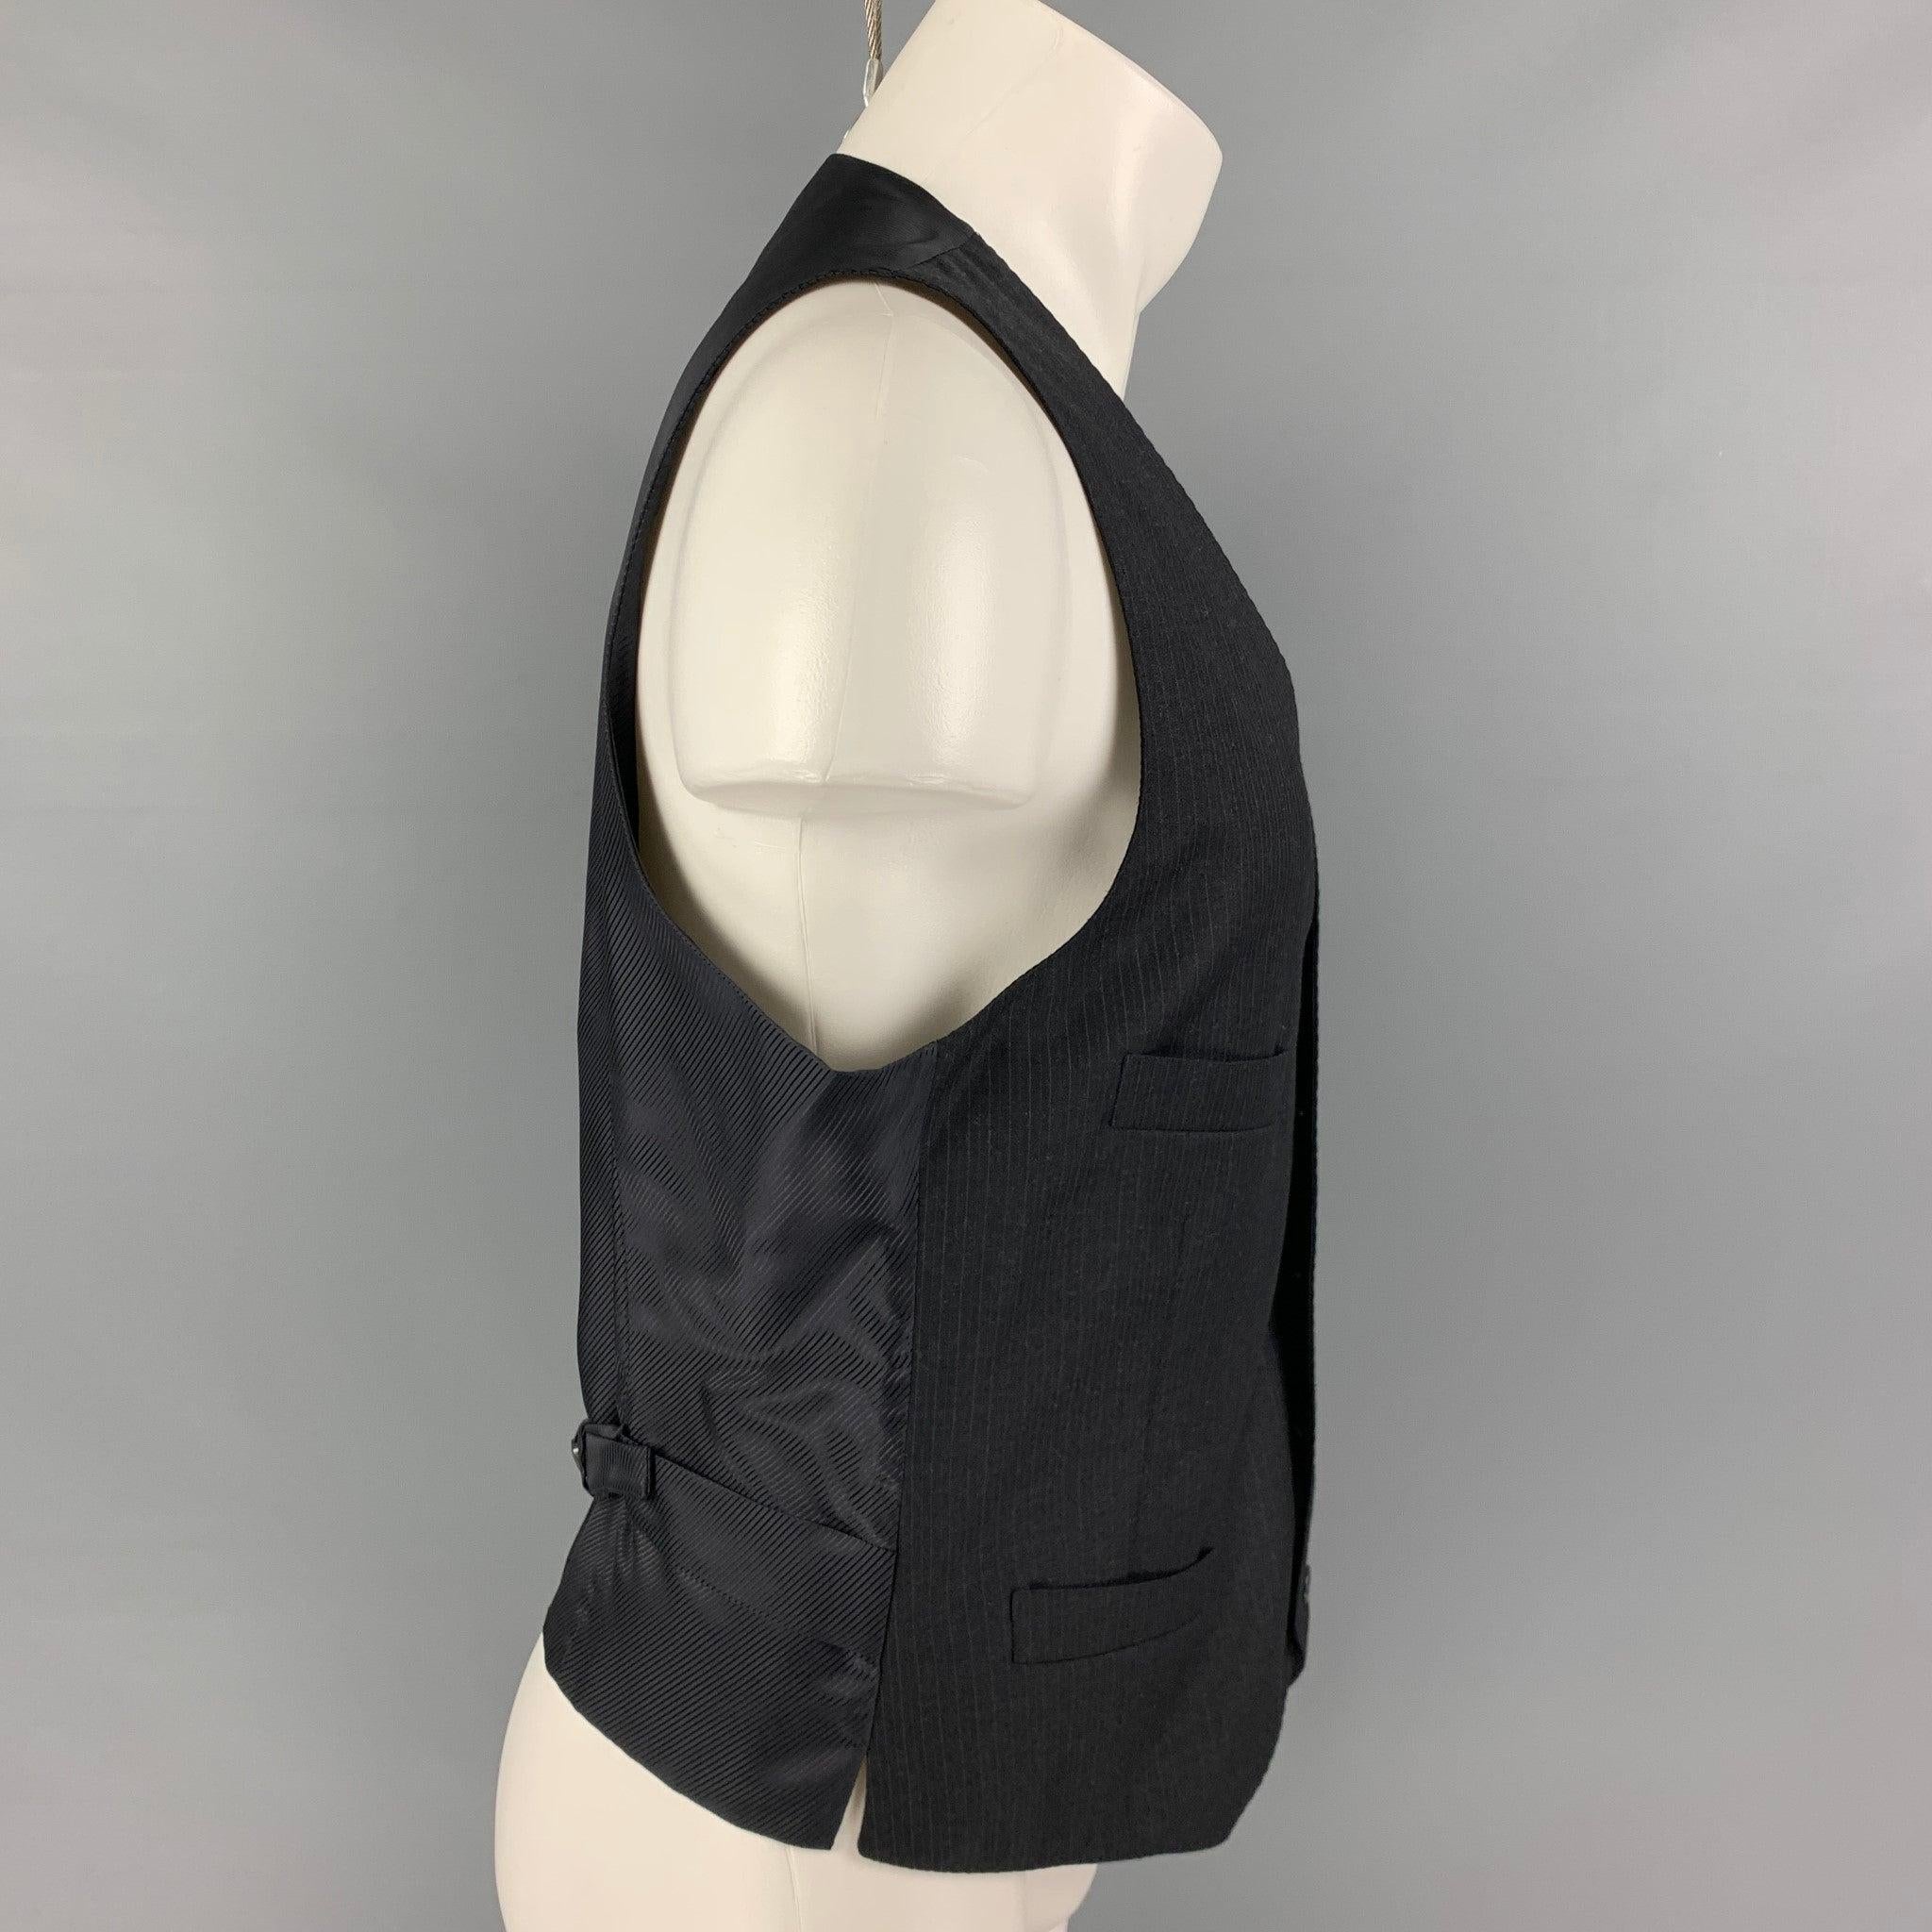 GIORGIO ARMANI vest comes in a charcoal pinstripe wool featuring a adjustable back, slit pockets, and a buttoned closure. Made in Italy.
Excellent
Pre-Owned Condition. 

Marked:   52 

Measurements: 
 
Shoulder: 13.5 inches  Chest: 40 inches Length: